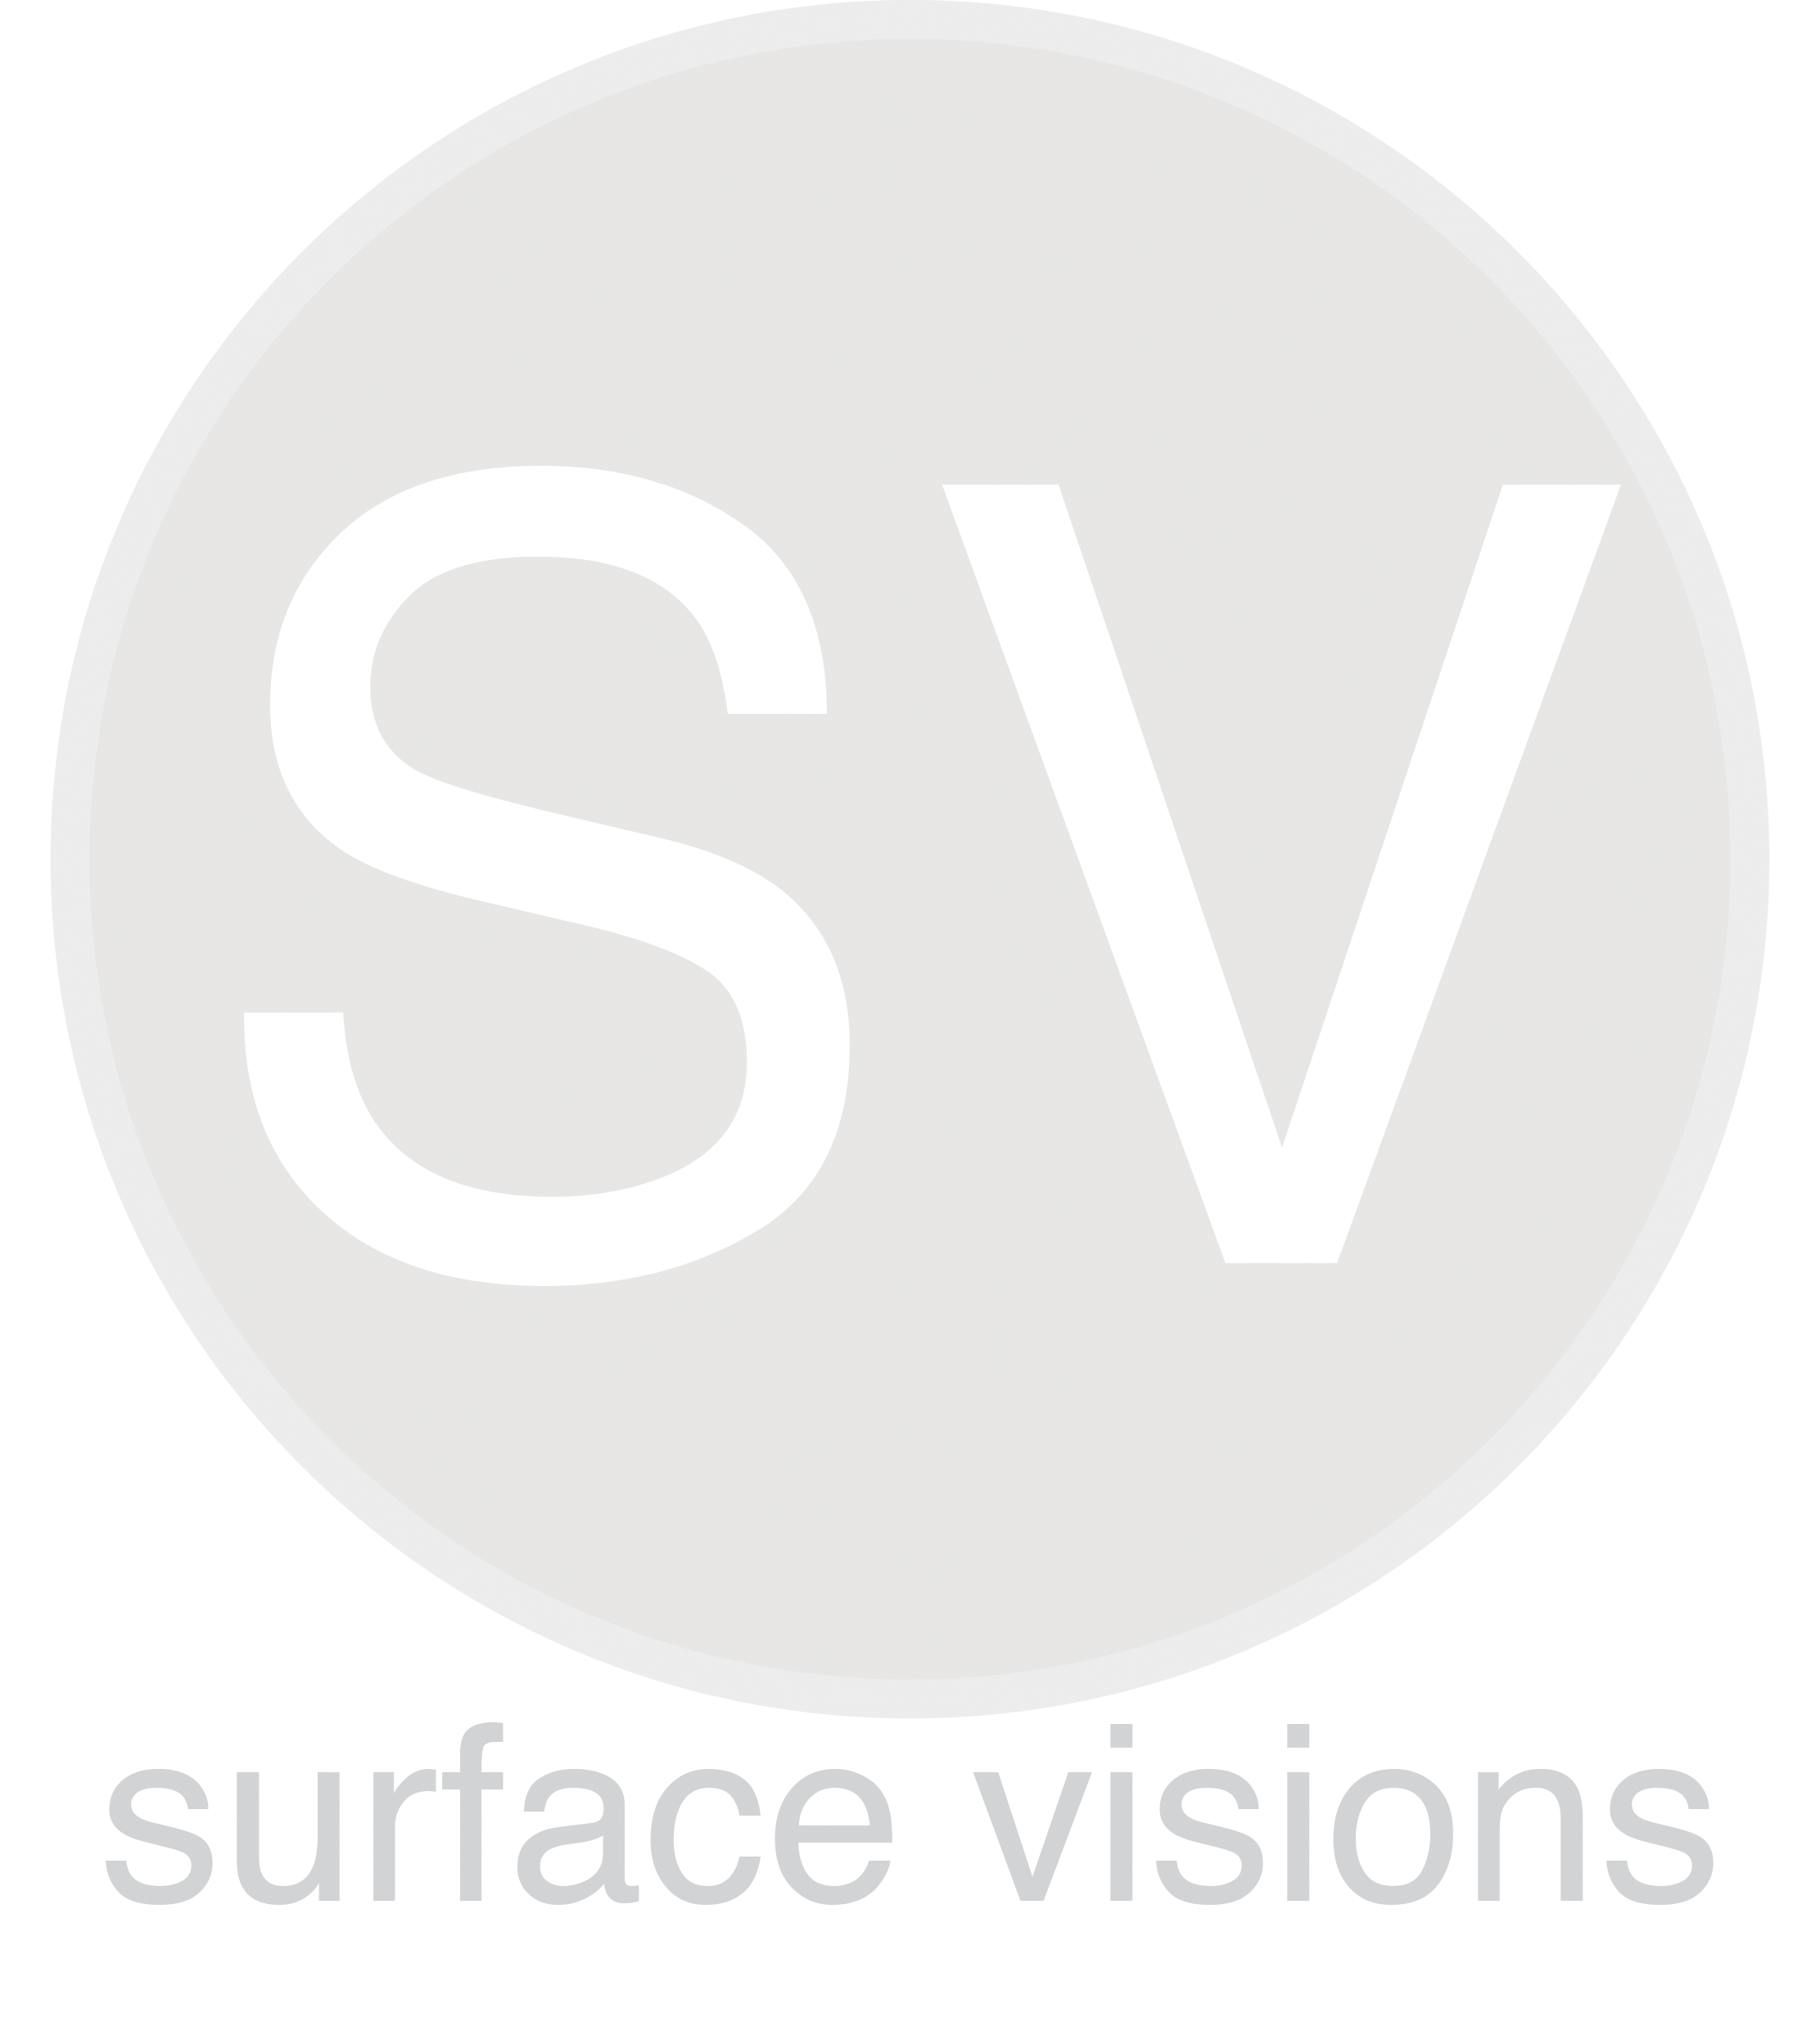 surface visions